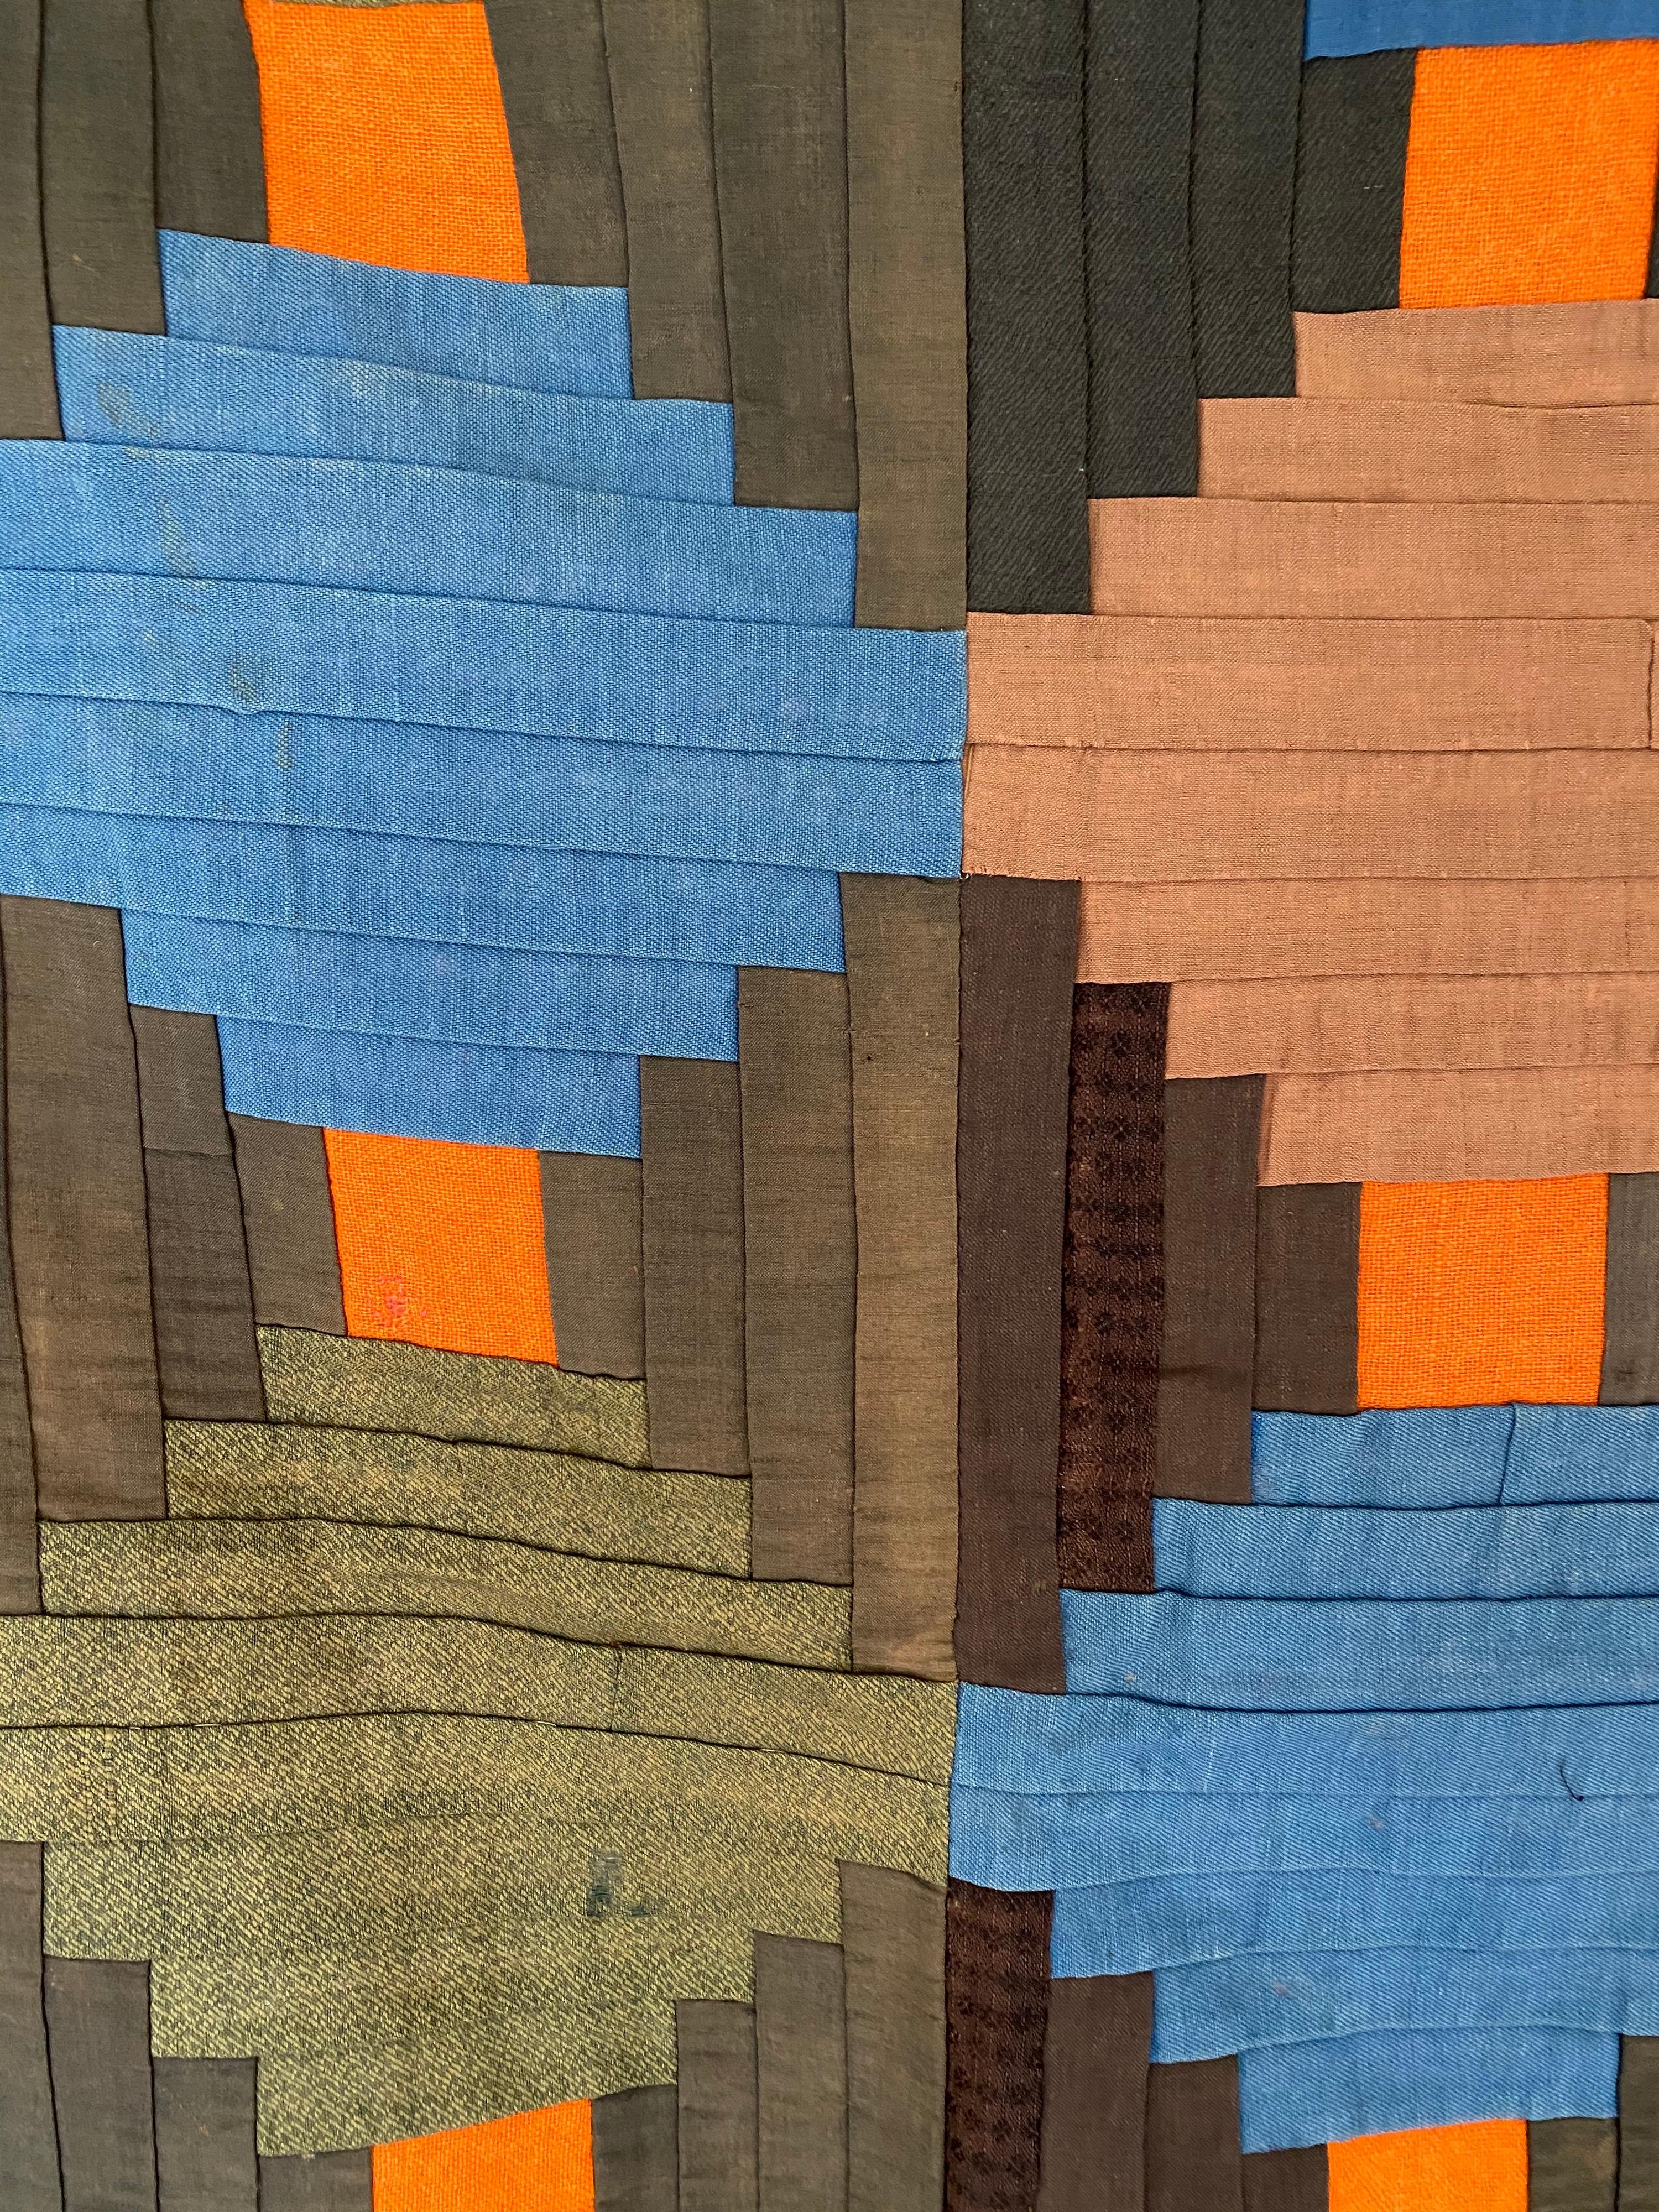 Antique courthouse steps quilt in blue, tan, taupe, and orange on a dark green background. This antique piece translates well in a modern setting with its geometric shapes and colors.